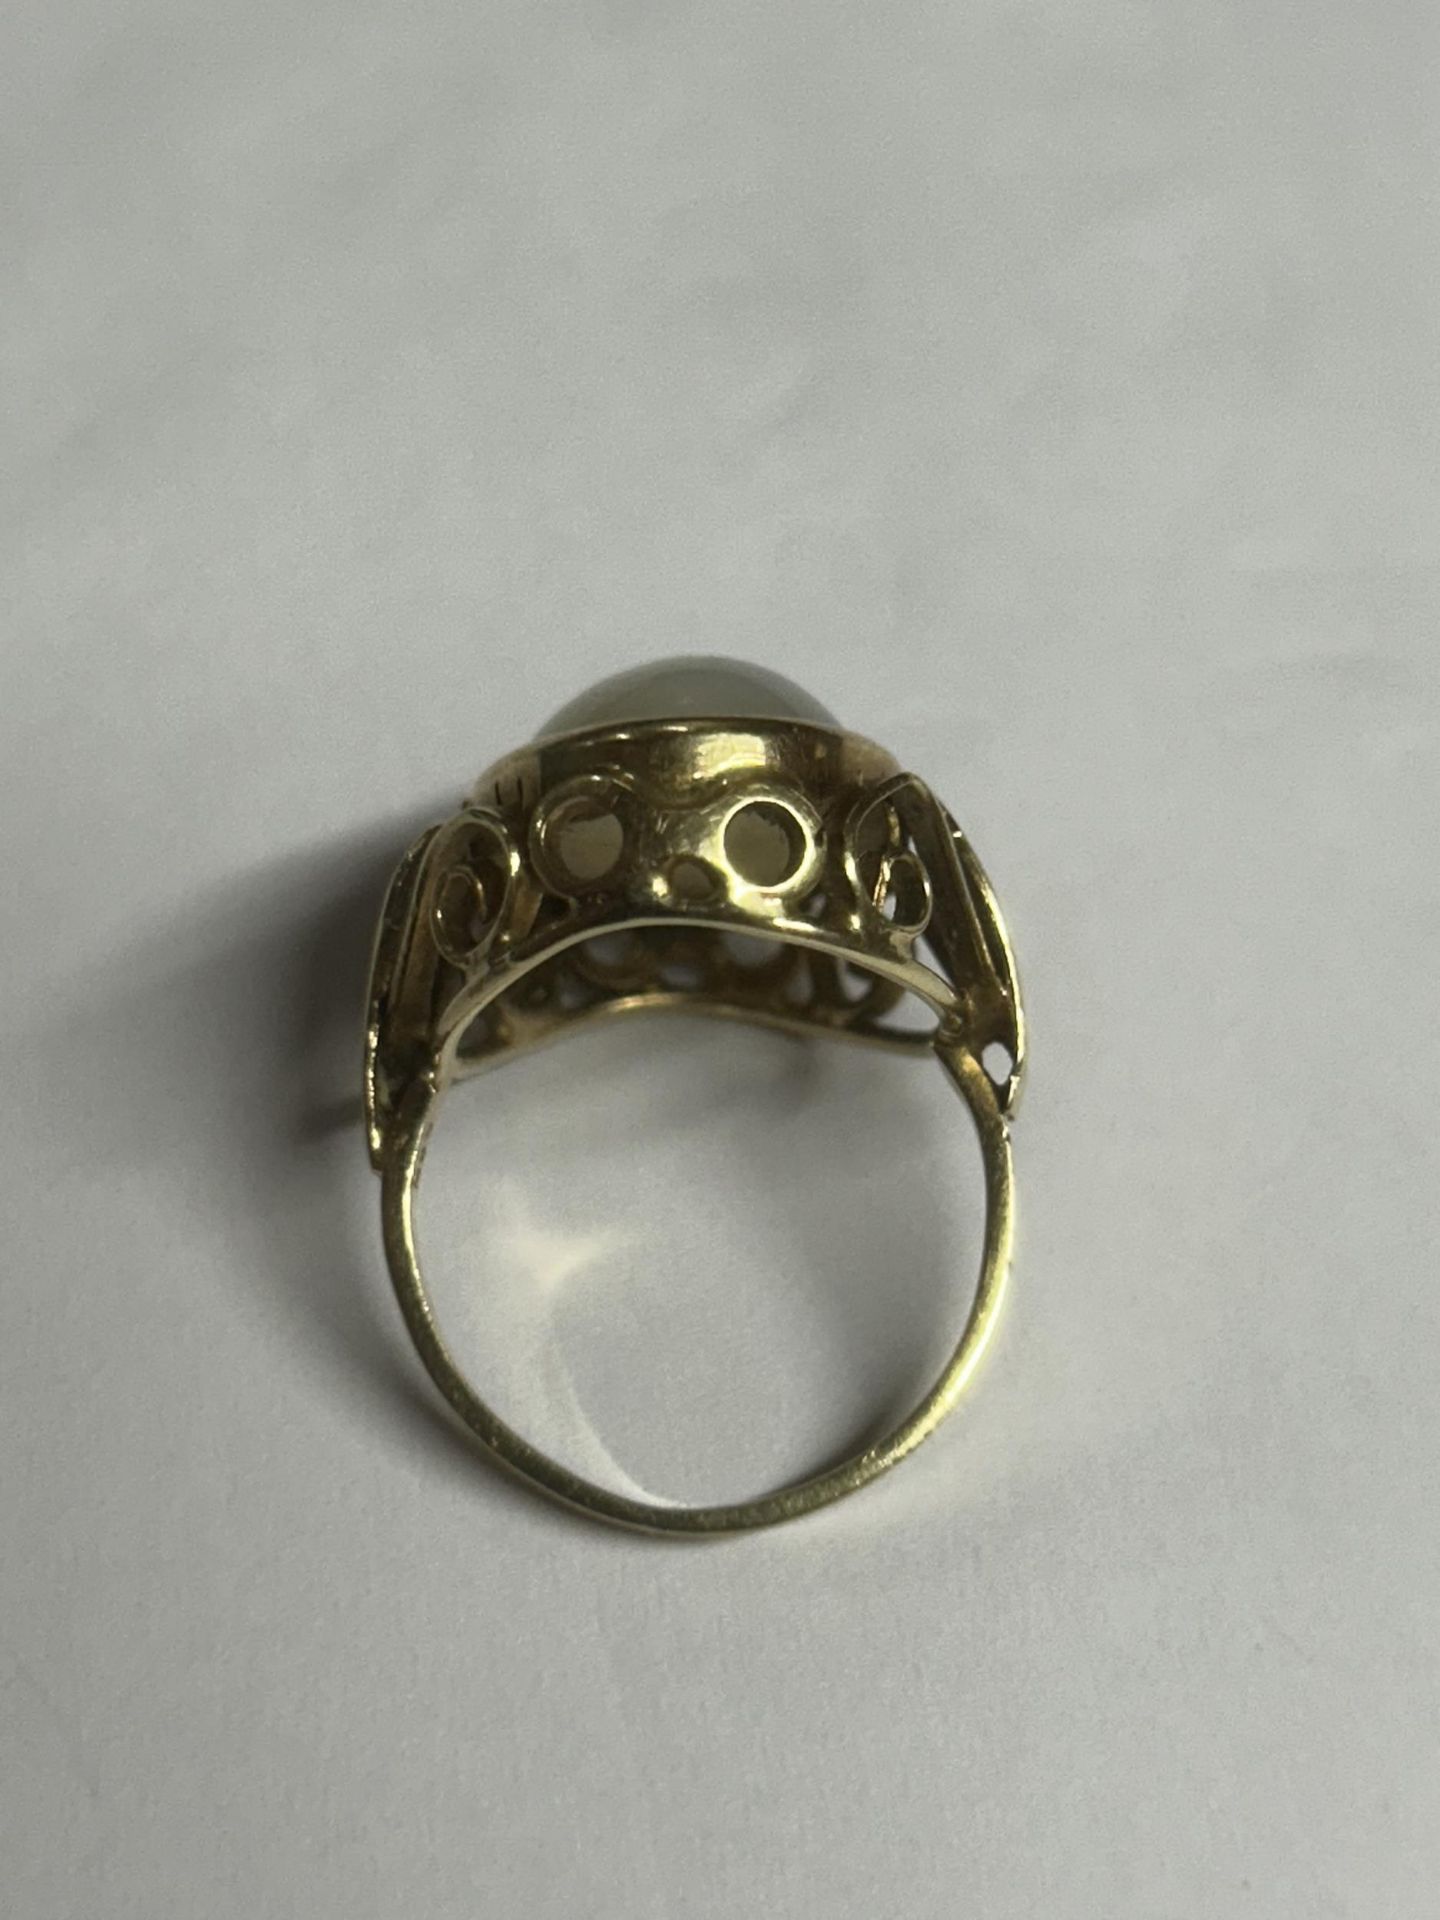 A 14CT GOLD DRESS RING, SIZE L. WEIGHT 5.09 GRAMS - Image 3 of 4